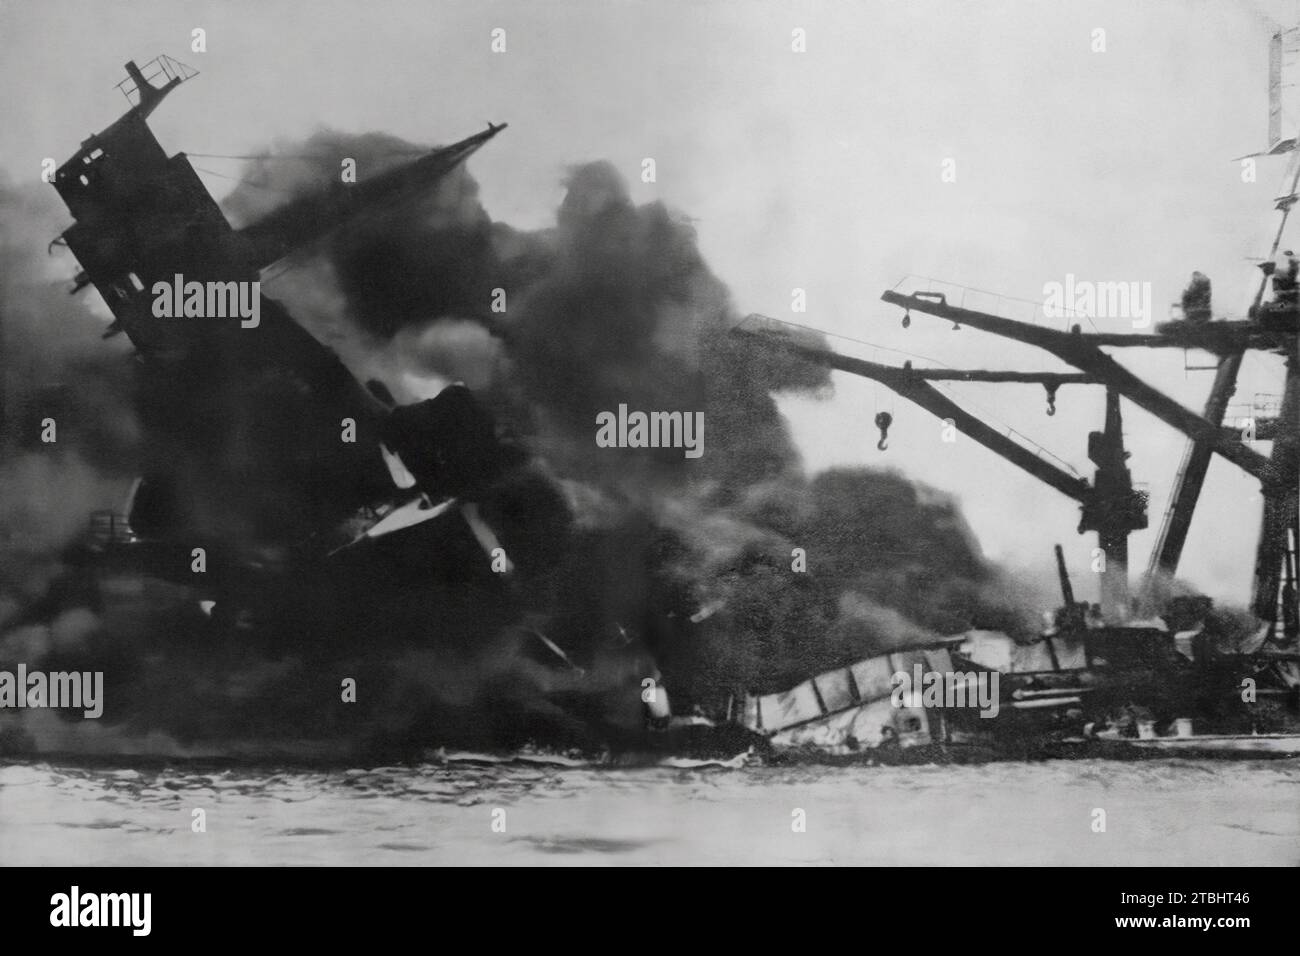 The U.S. battleship 'Arizona' blazing before sinking following the Japanese attack on Pearl Harbour, Hawaii on 7th December 1941, during the Second World War. Stock Photo